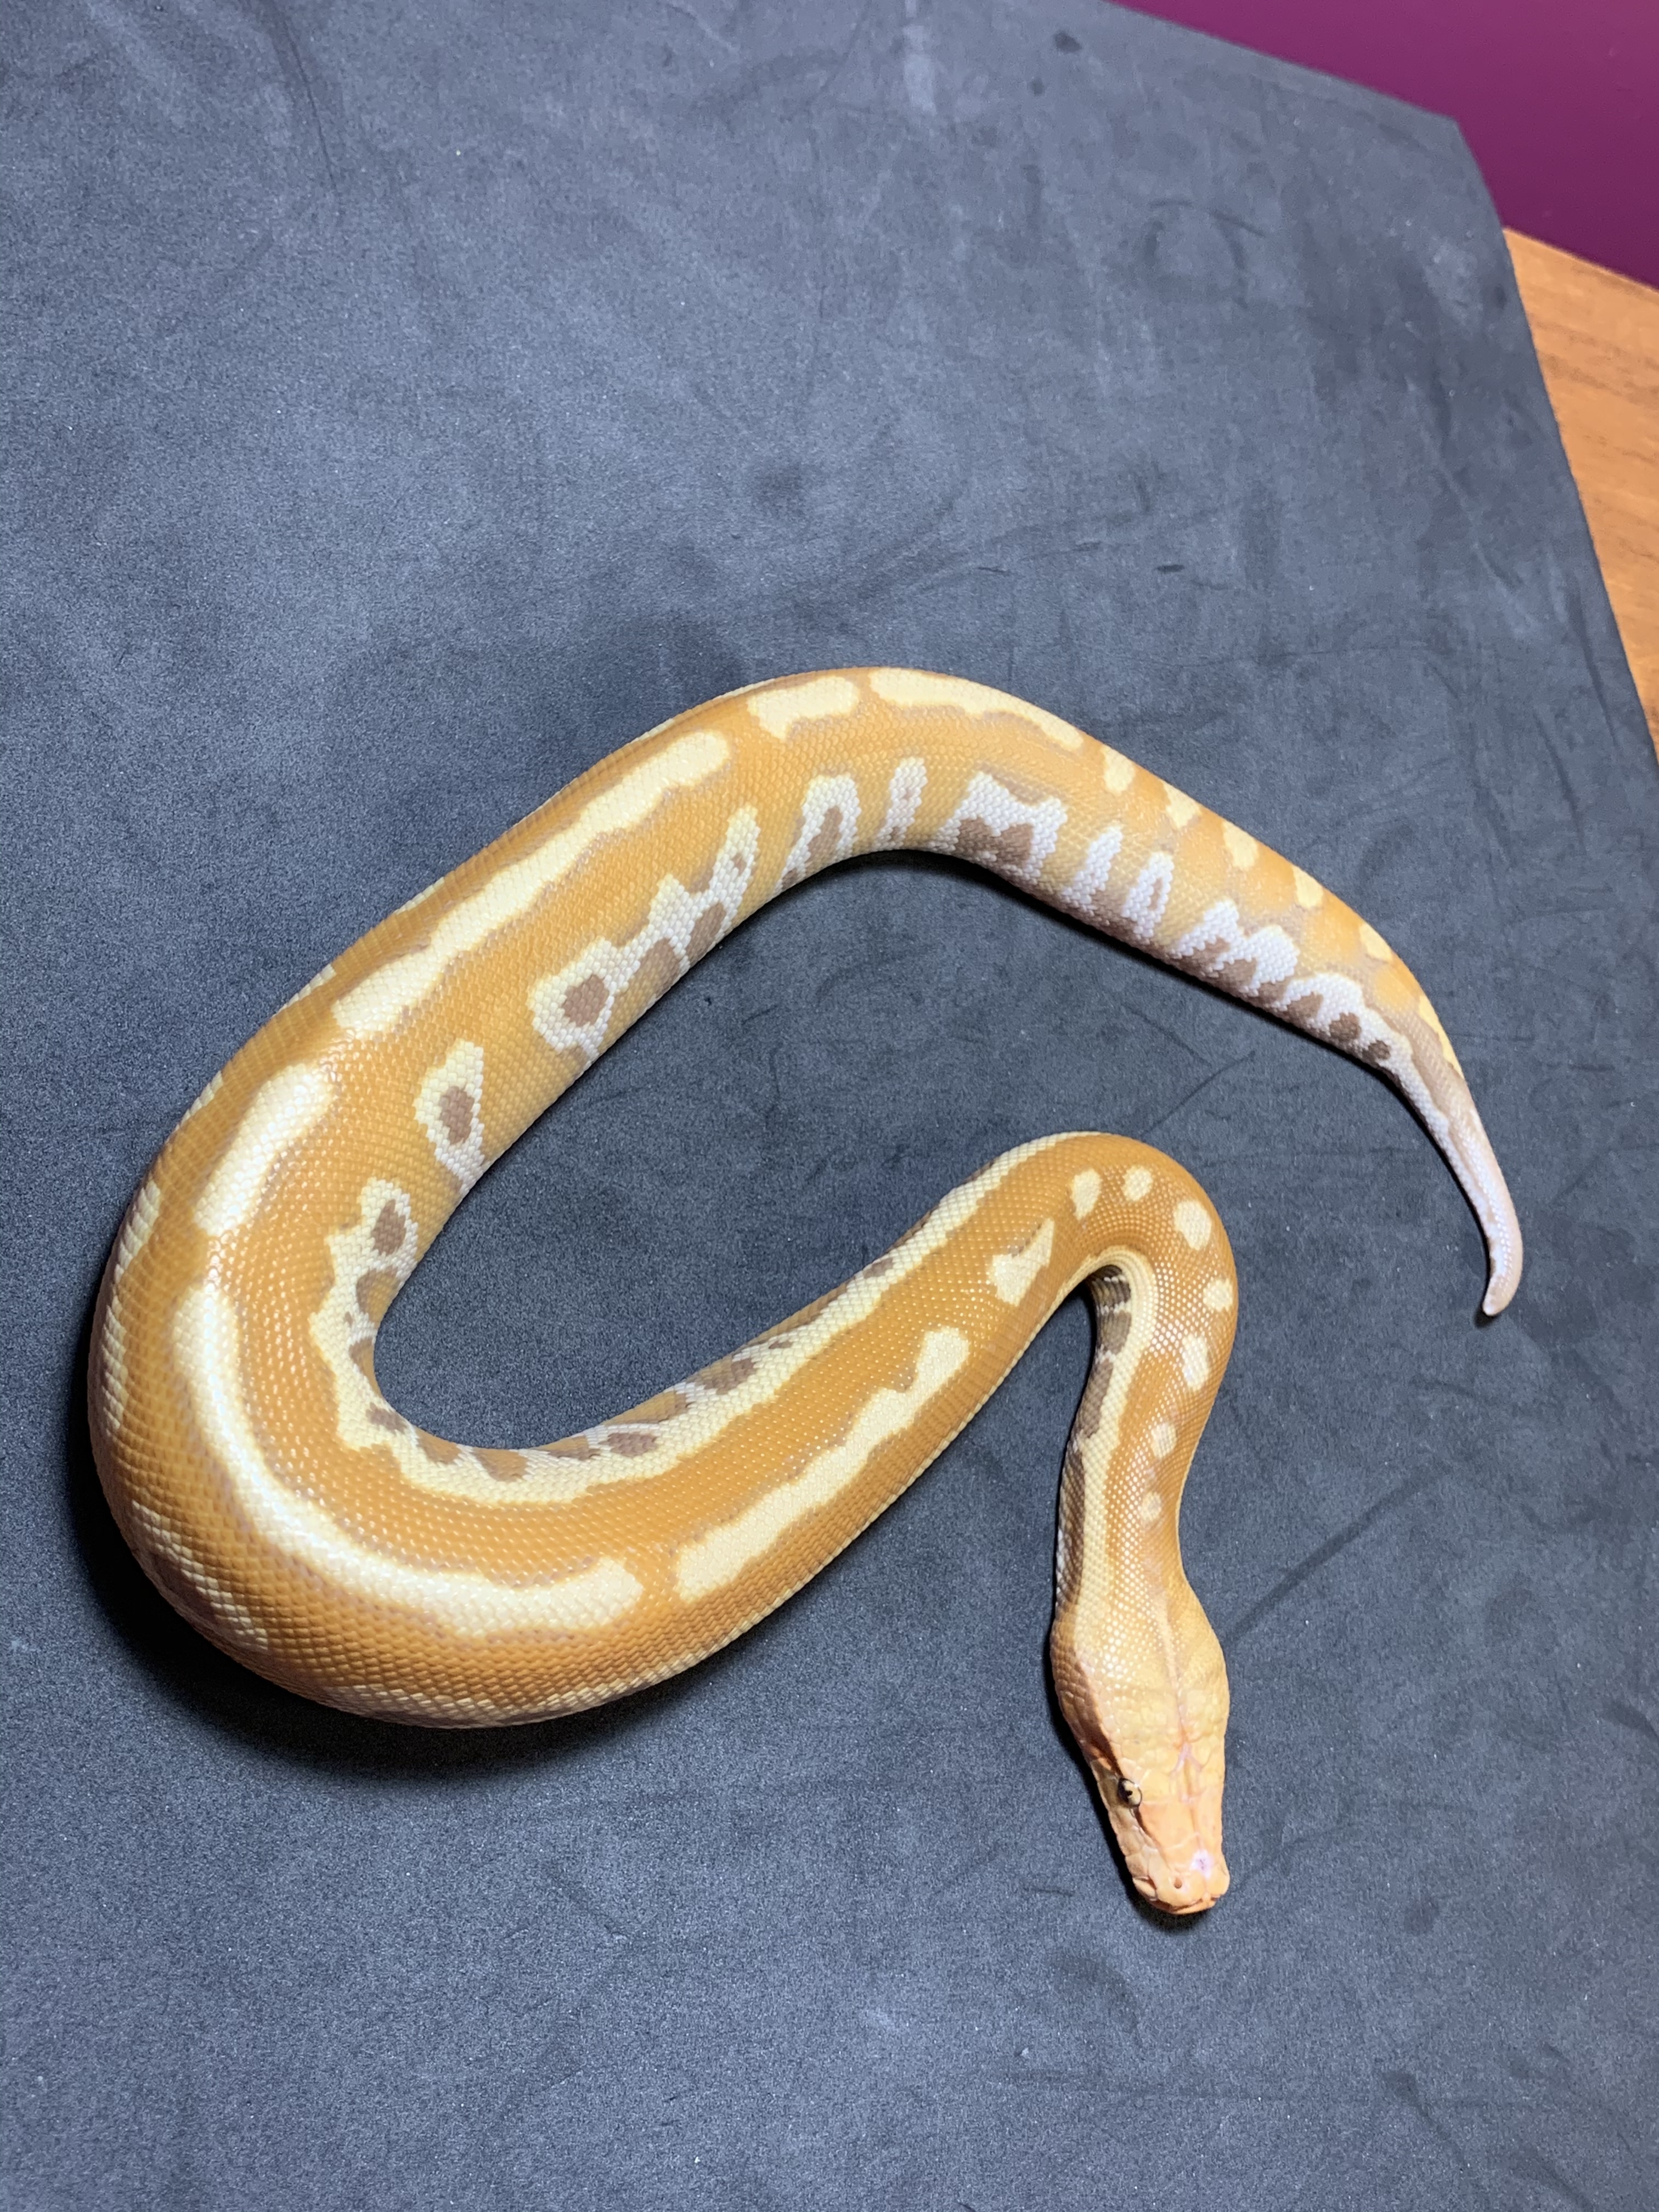 T+ Albino Blood Python by Danner Constrictors